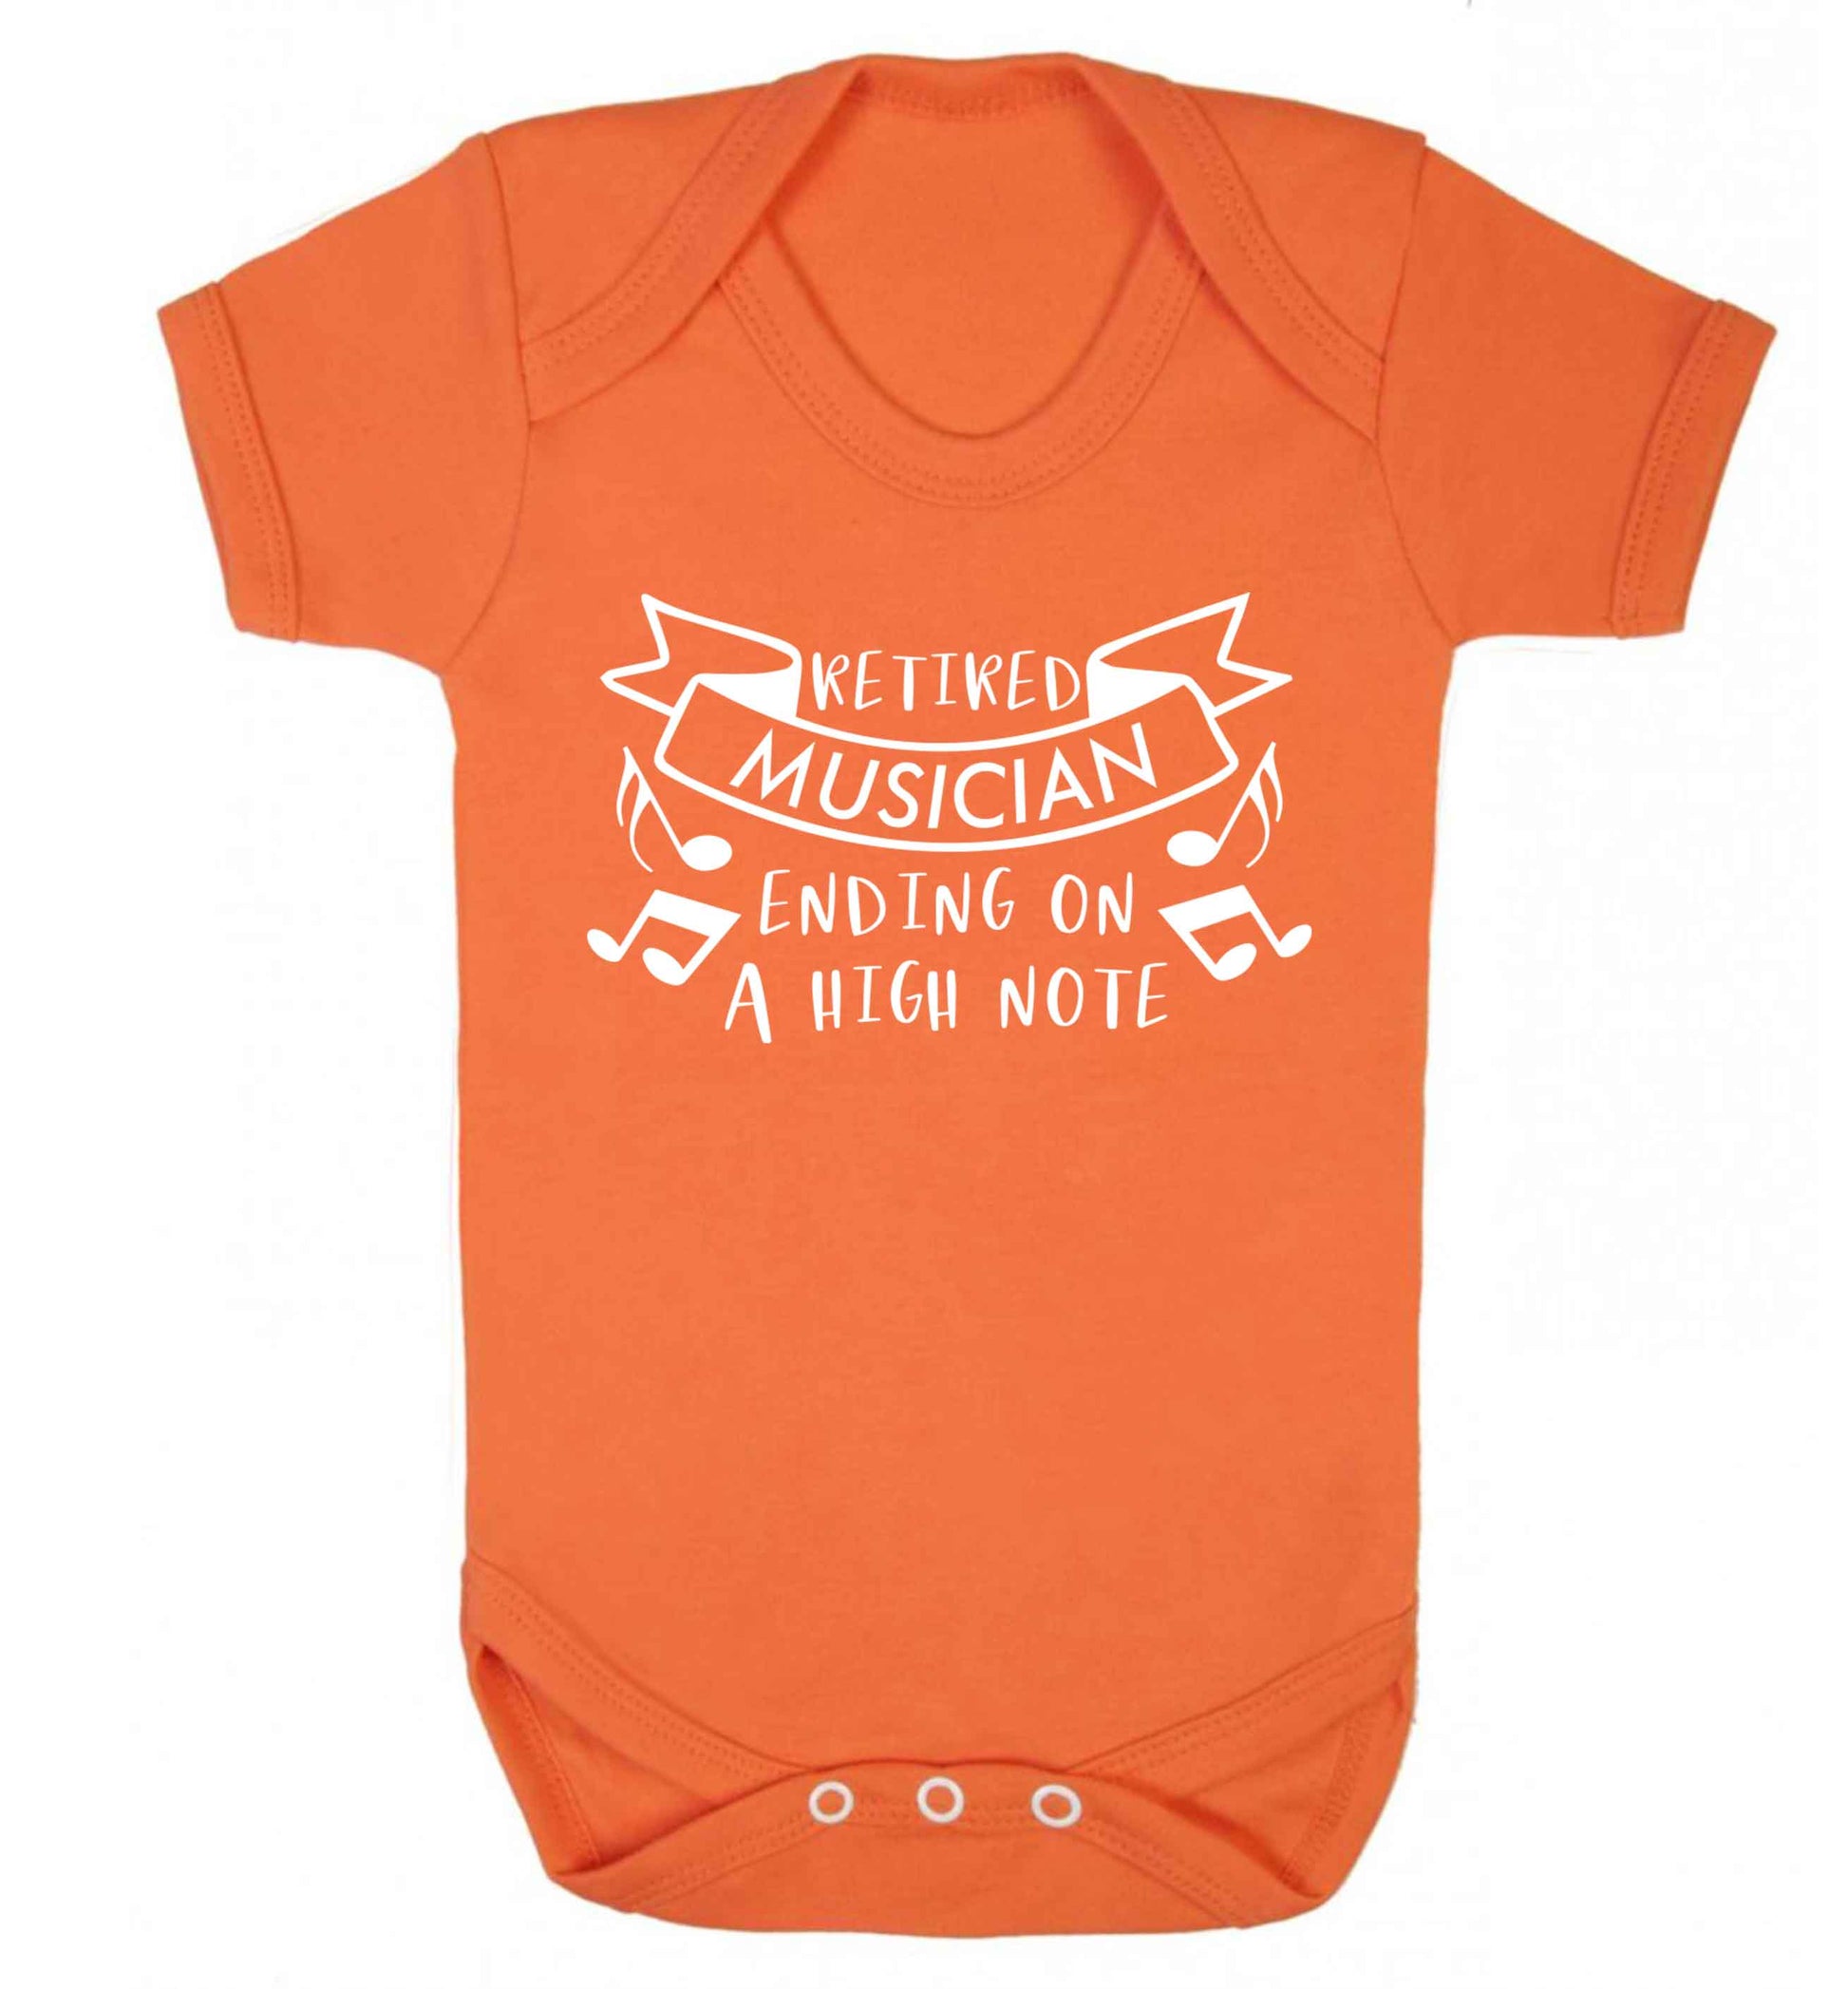 Retired musician ending on a high note Baby Vest orange 18-24 months